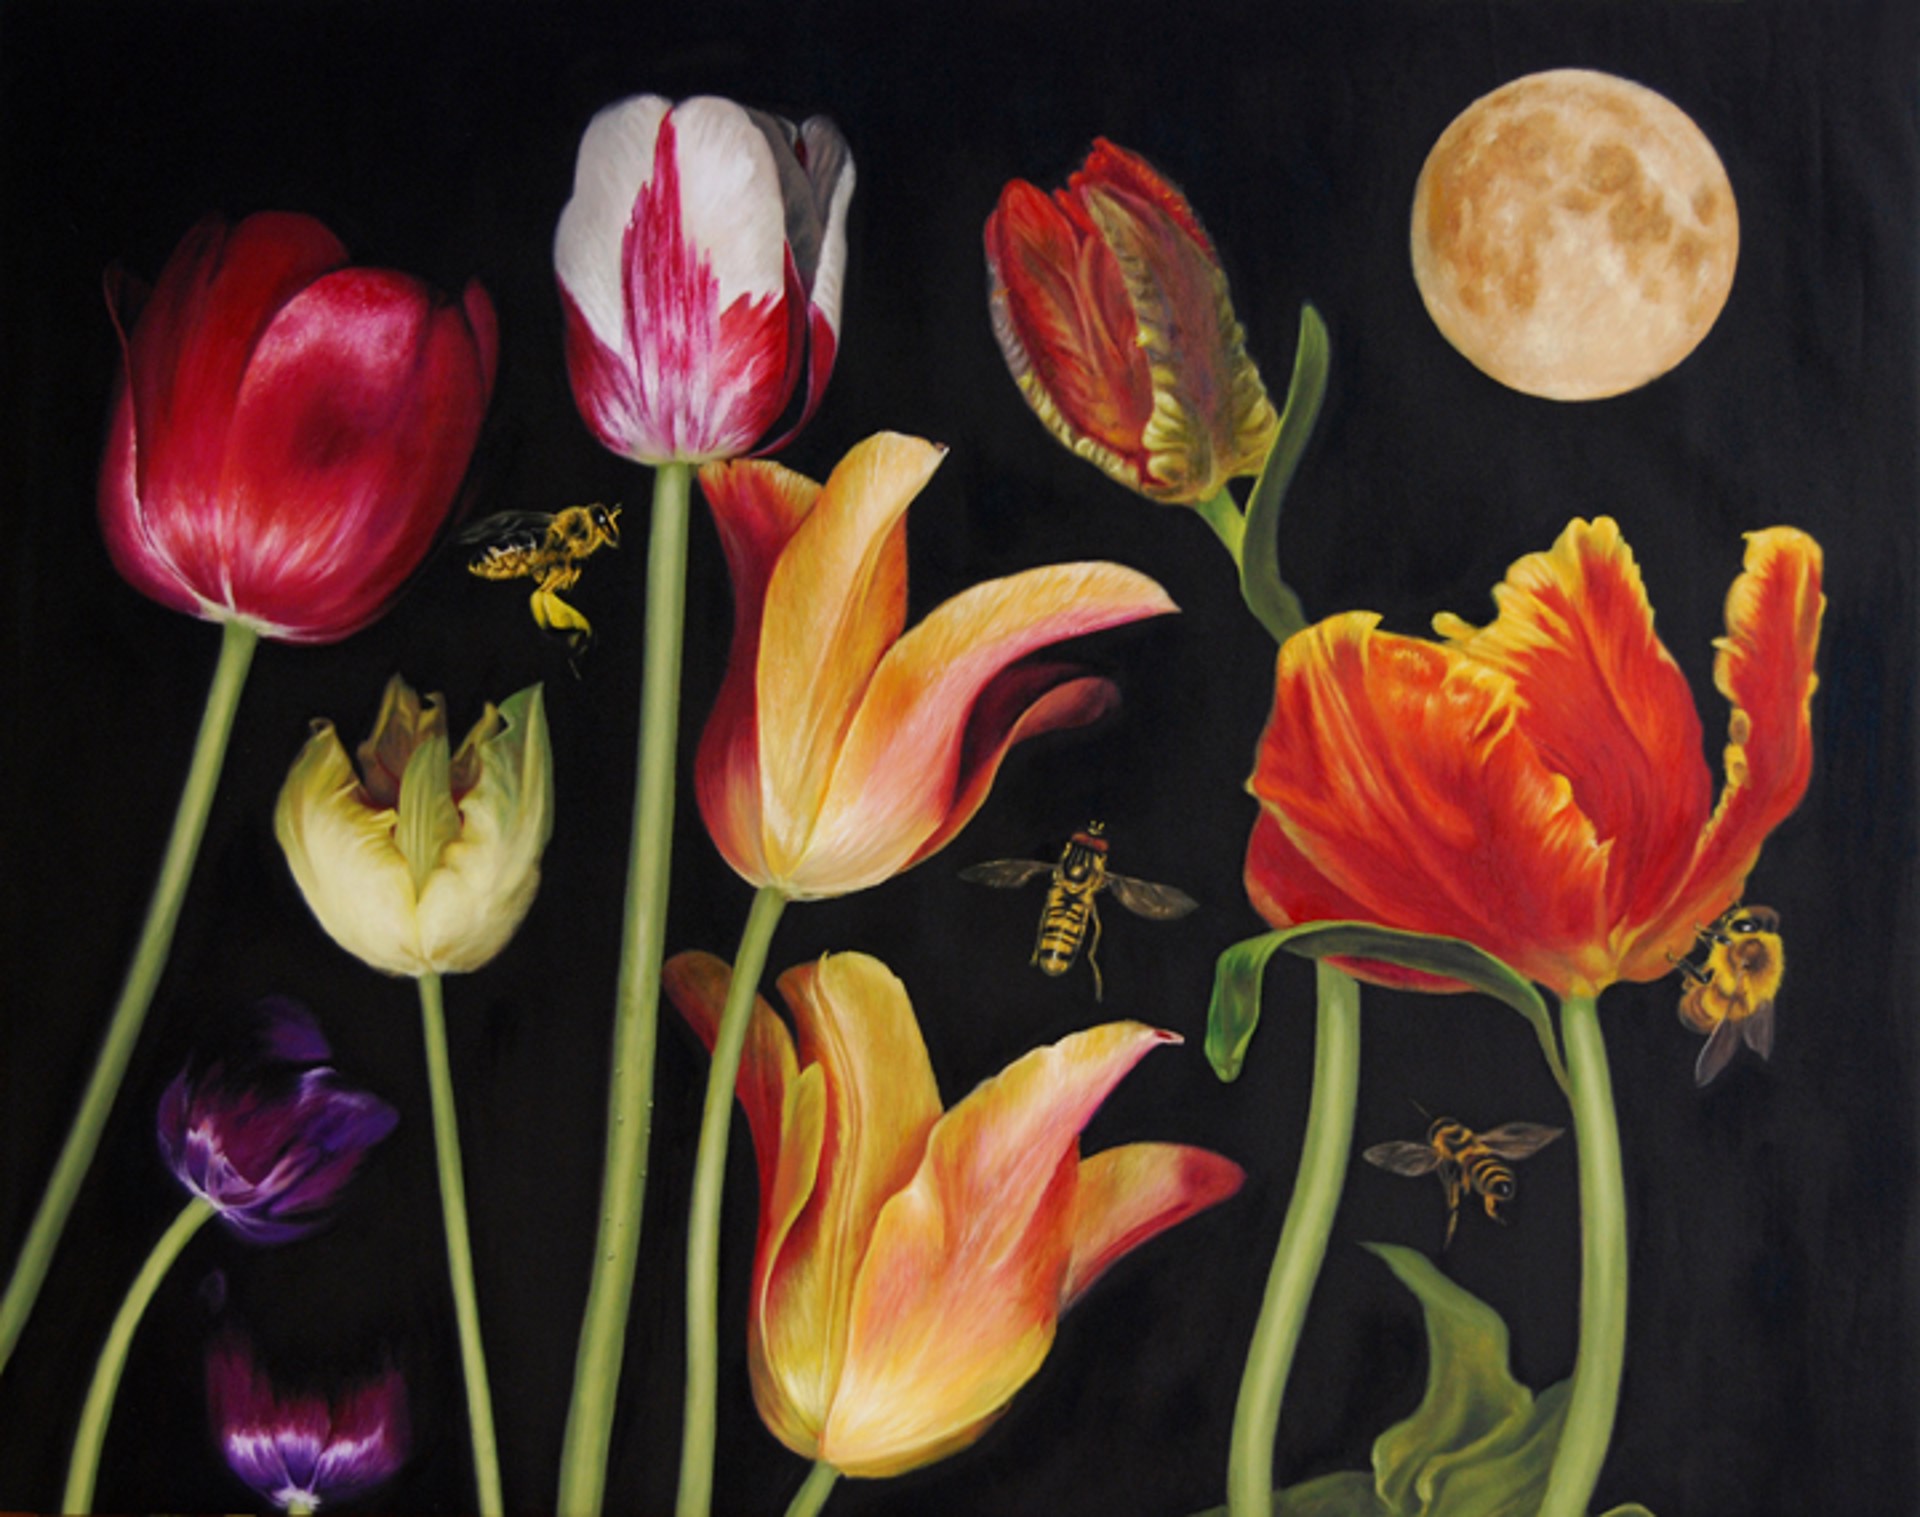 The Tulips and The Bees by Marc Dennis